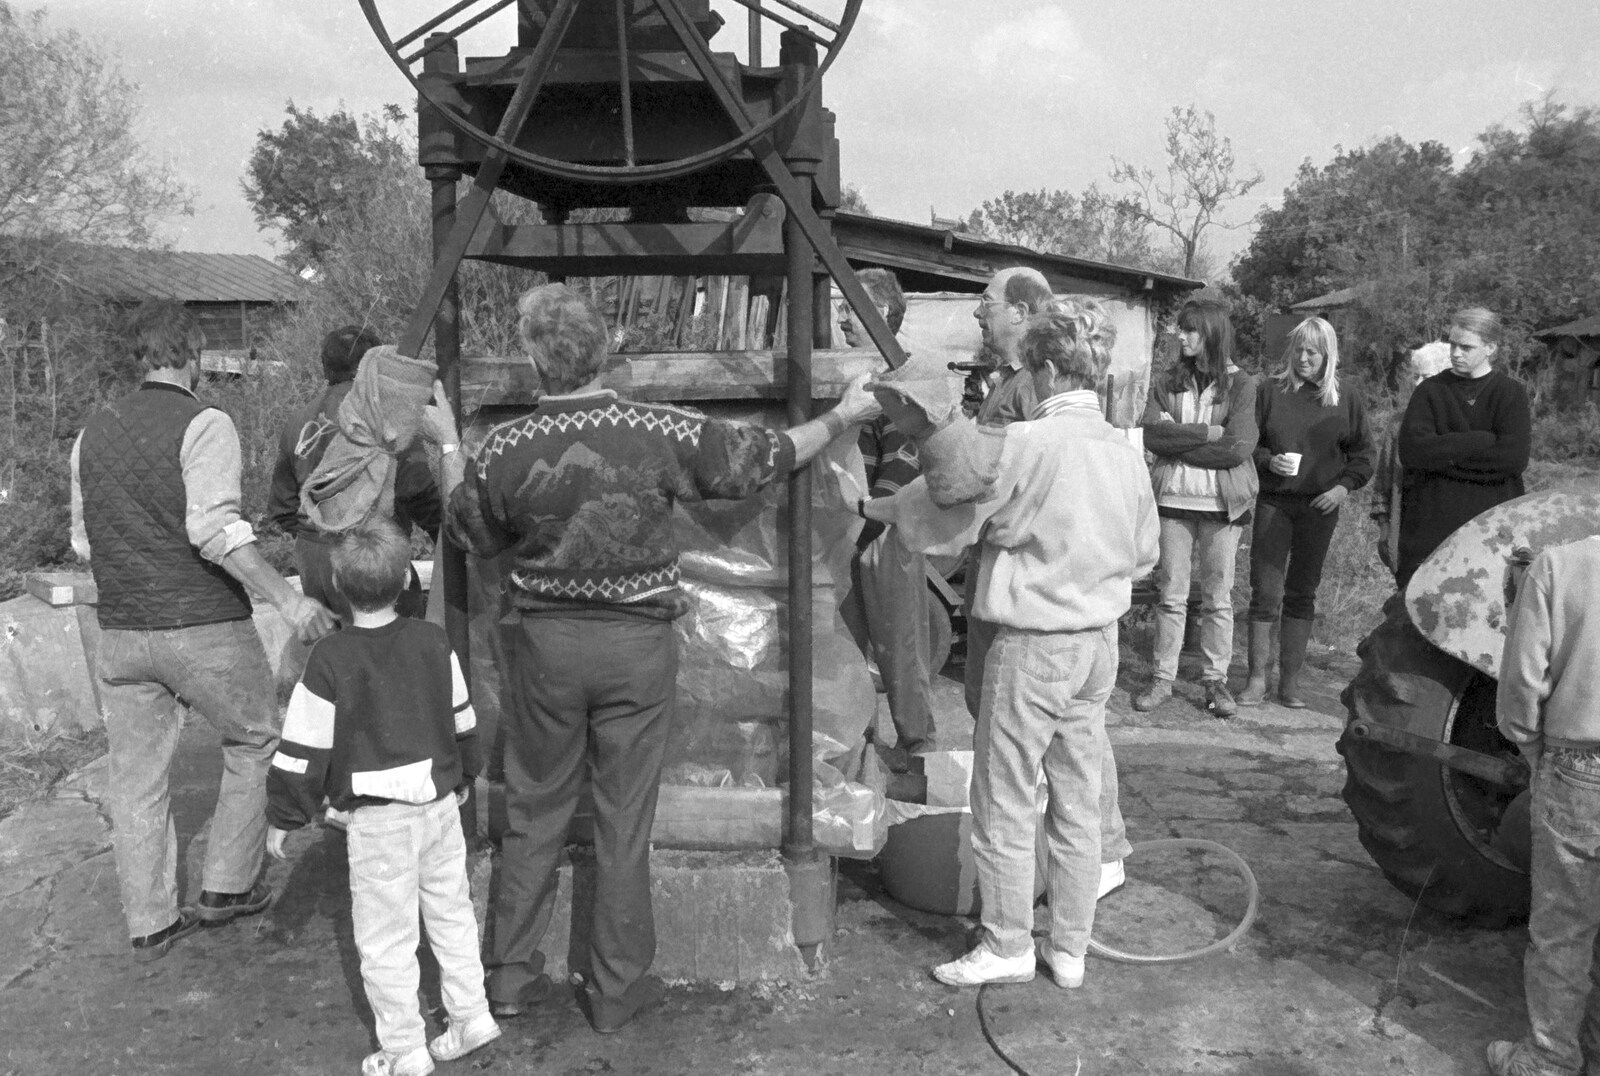 The top pressing board is applied from Cider Making in Black and White, Stuston, Suffolk - 11th October 1992